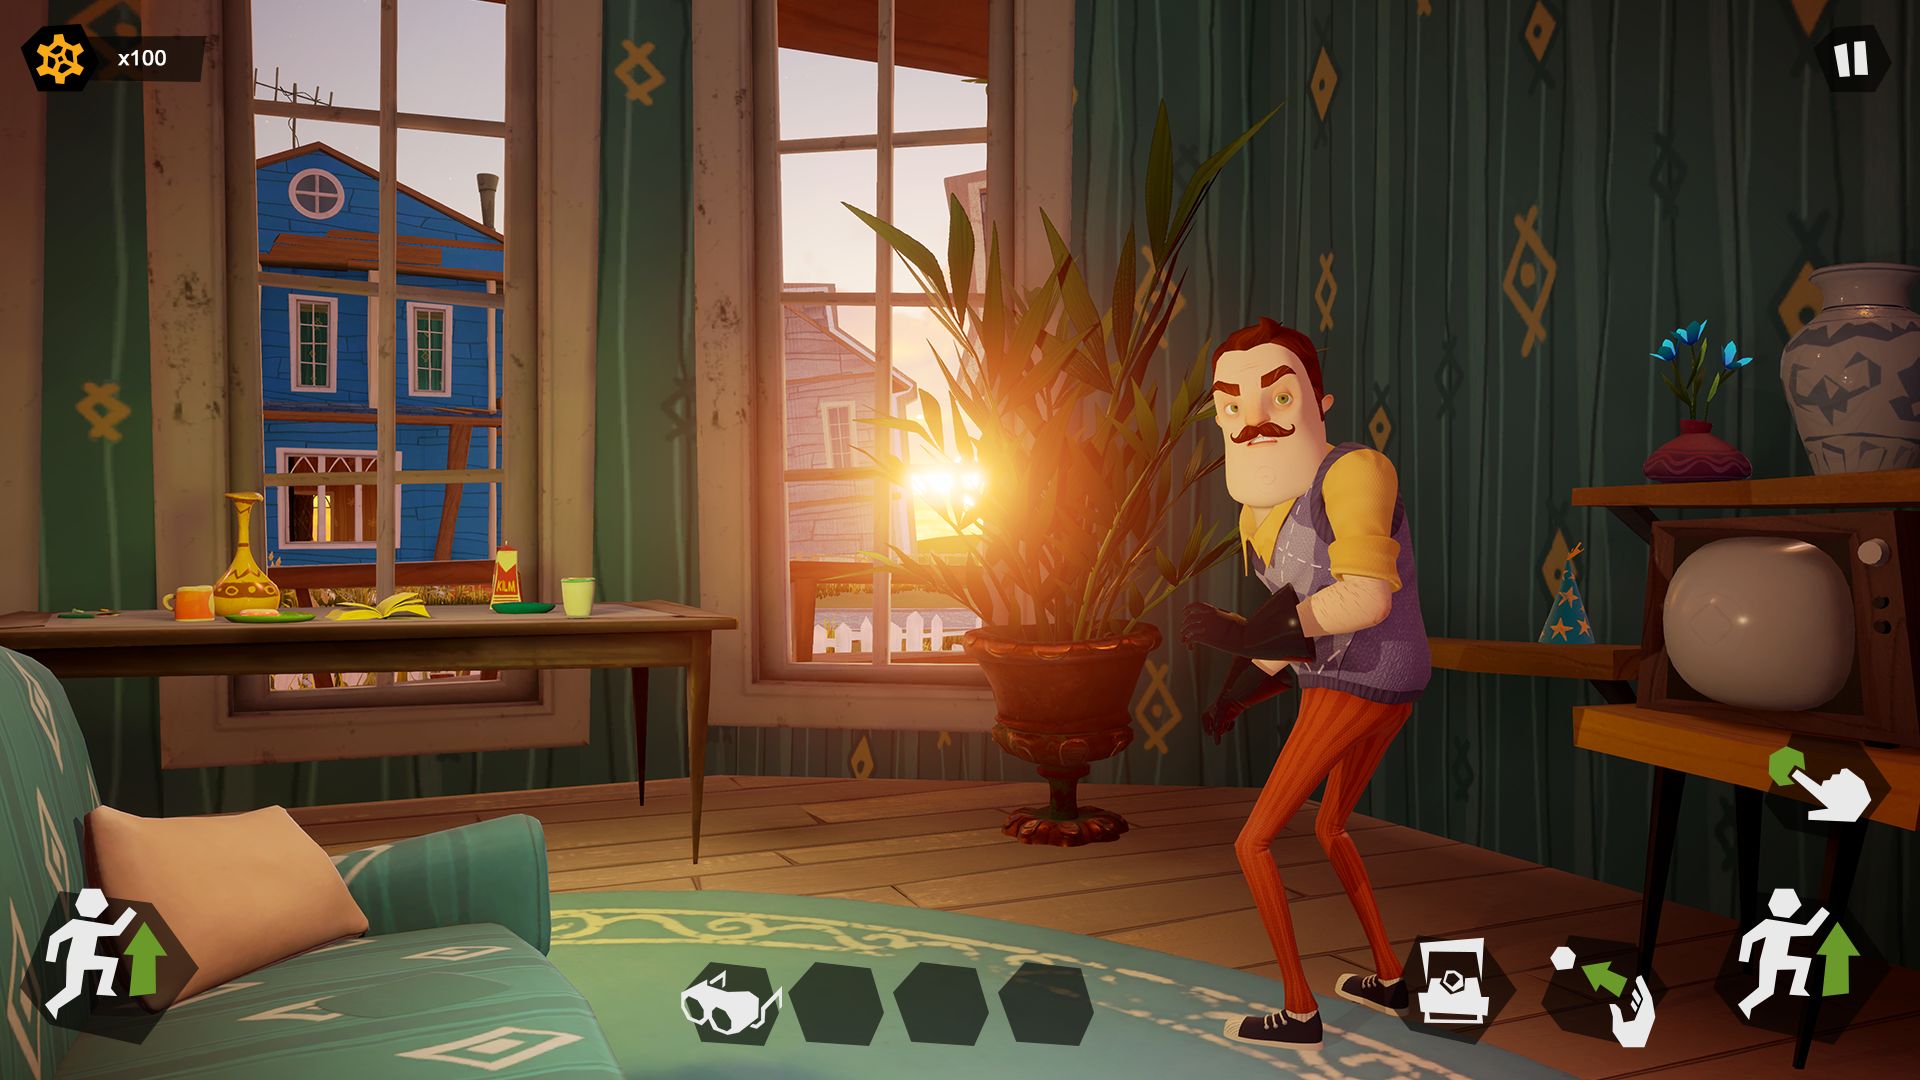 Télécharger Hello Neighbor Nicky's Diaries pour Android gratuit.